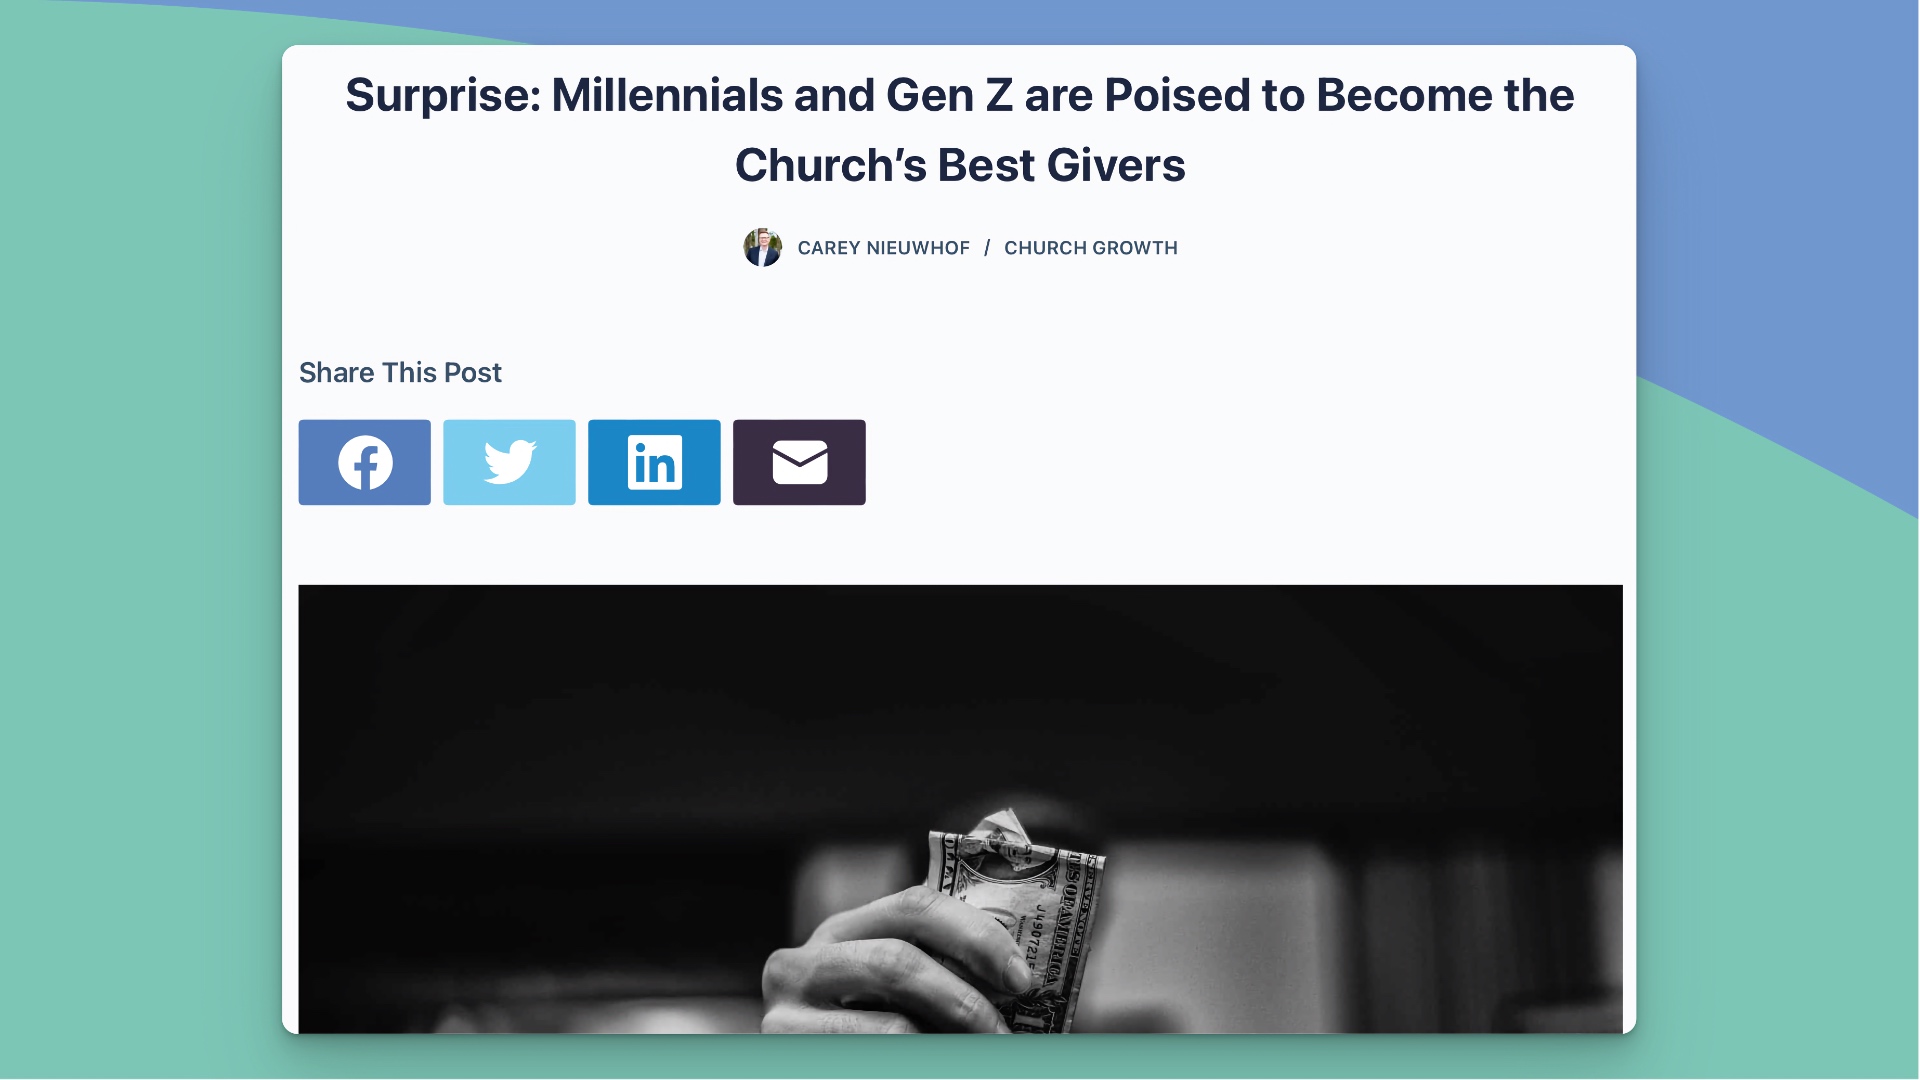 Surprise - Millennials and Gen Z are Poised to Become the Church’s Best Givers